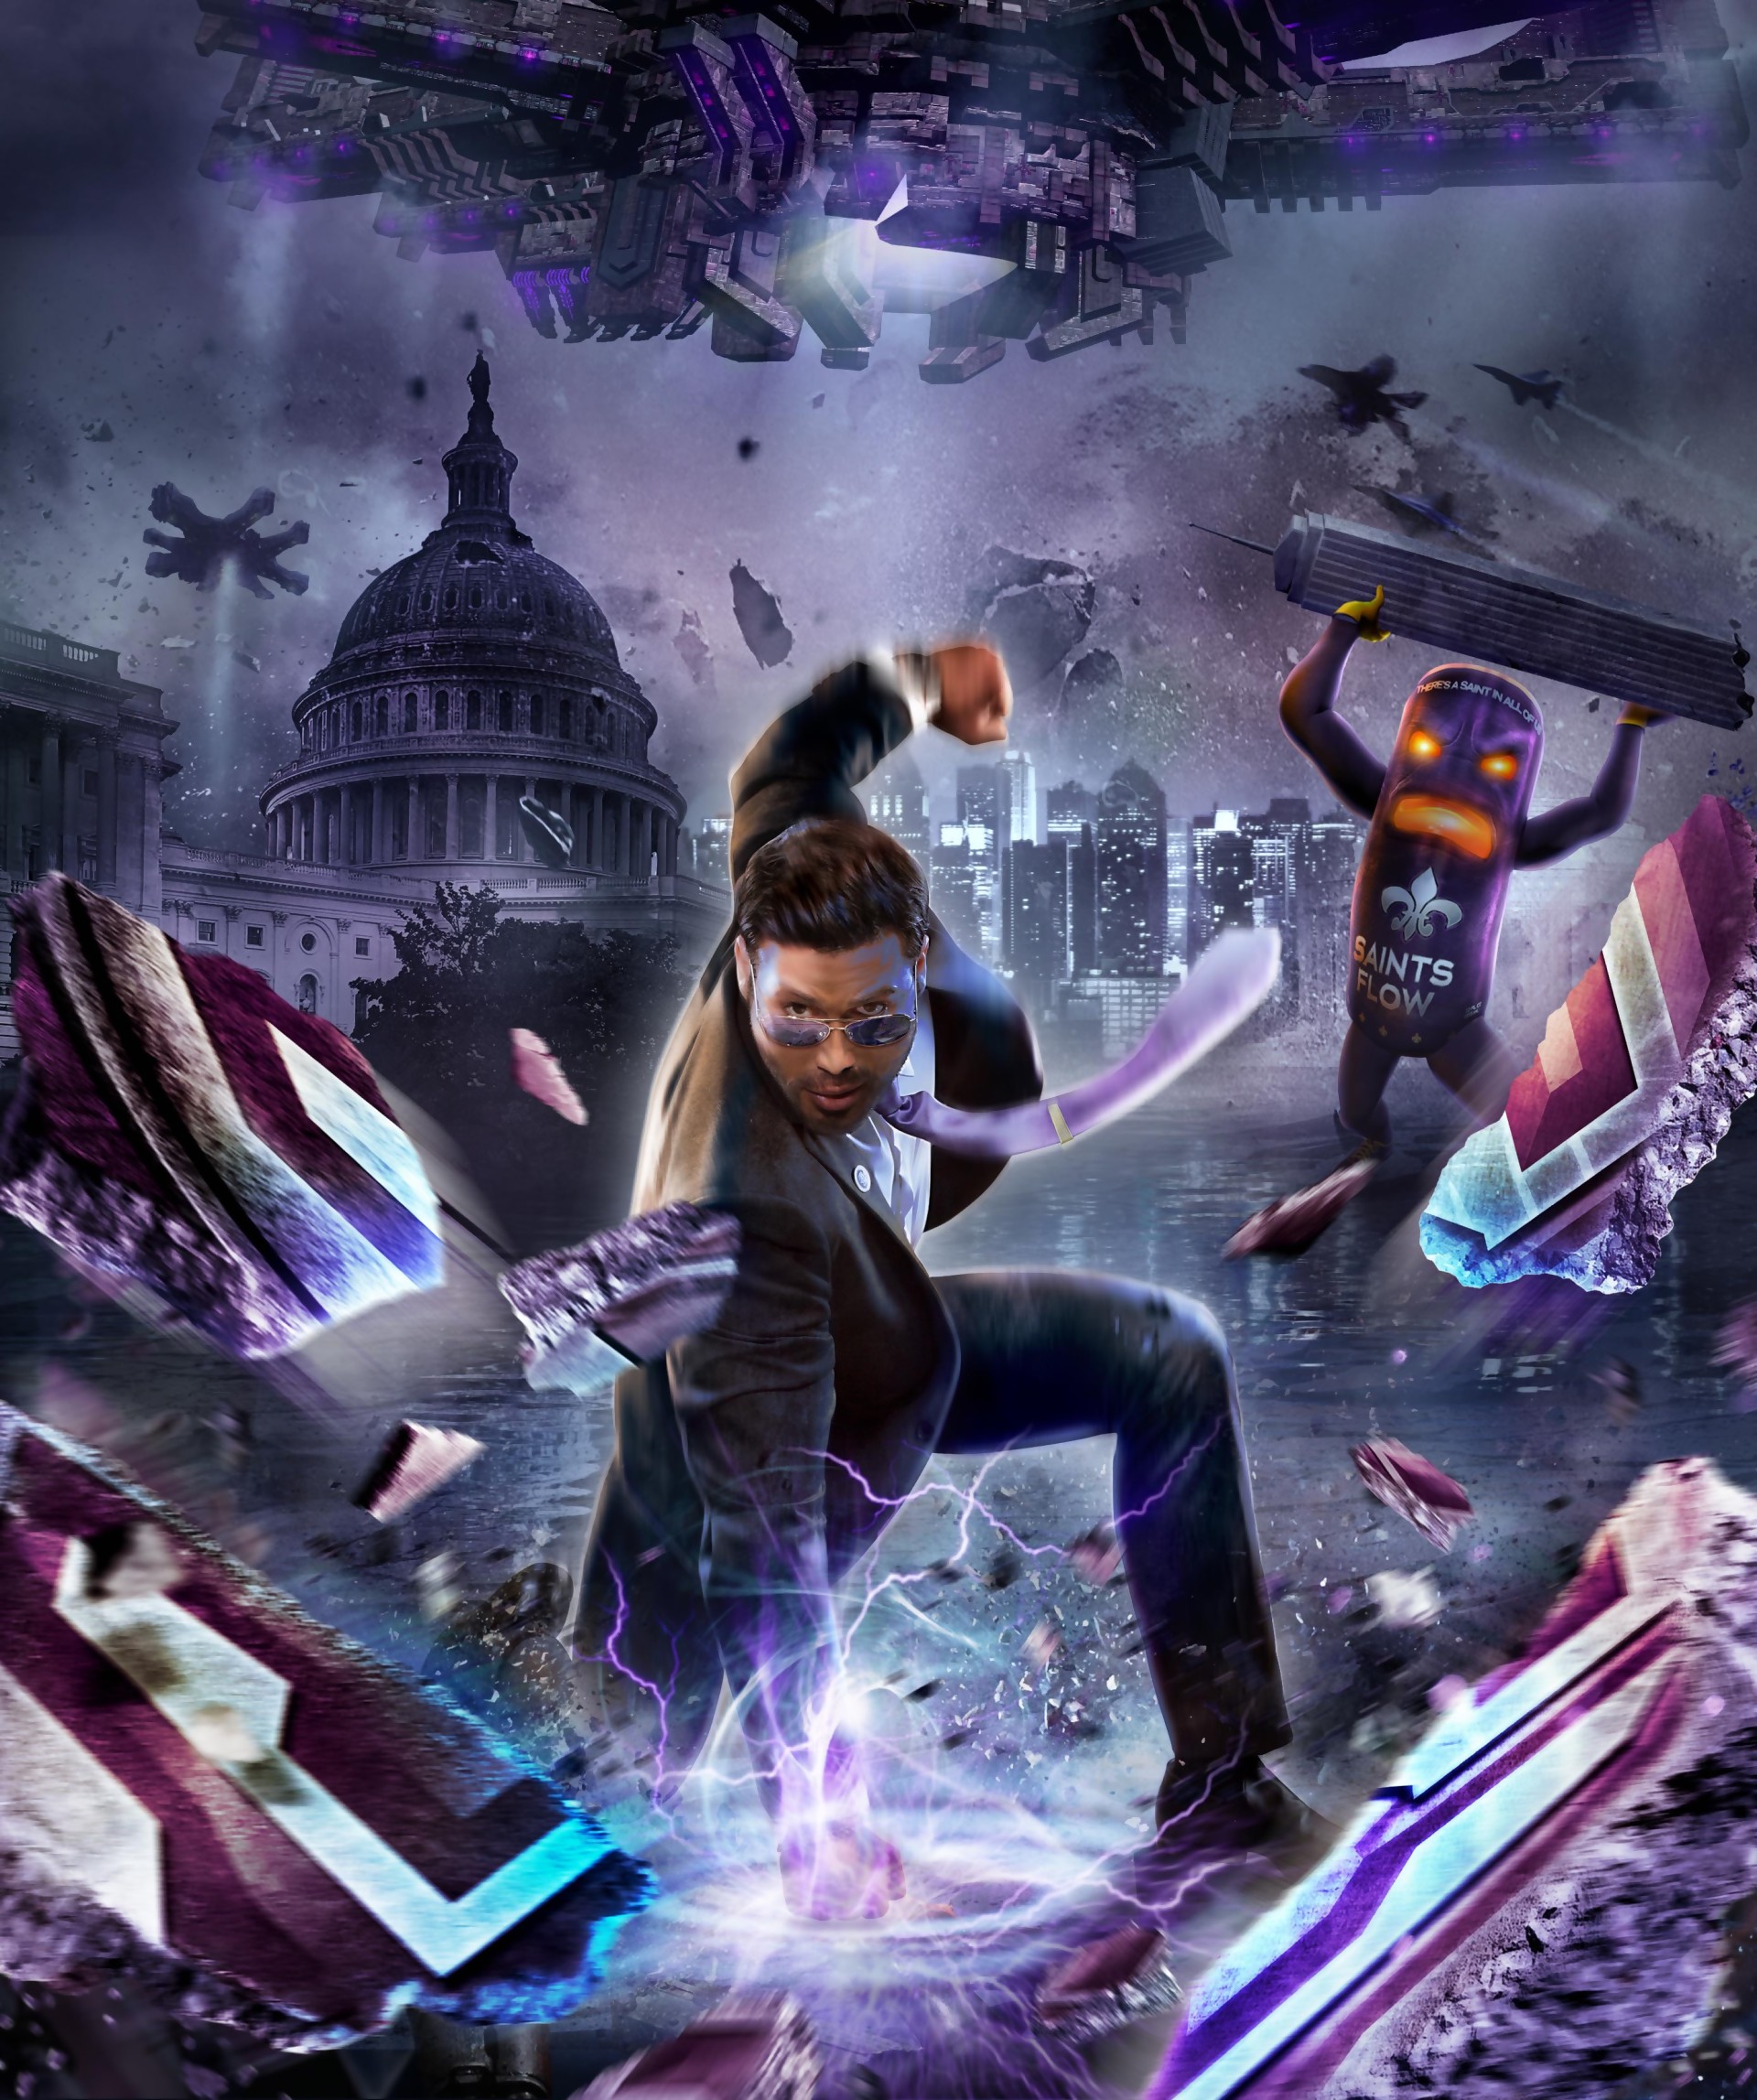 Artworks Saints Row IV Re-elected + Gat Out of Hell